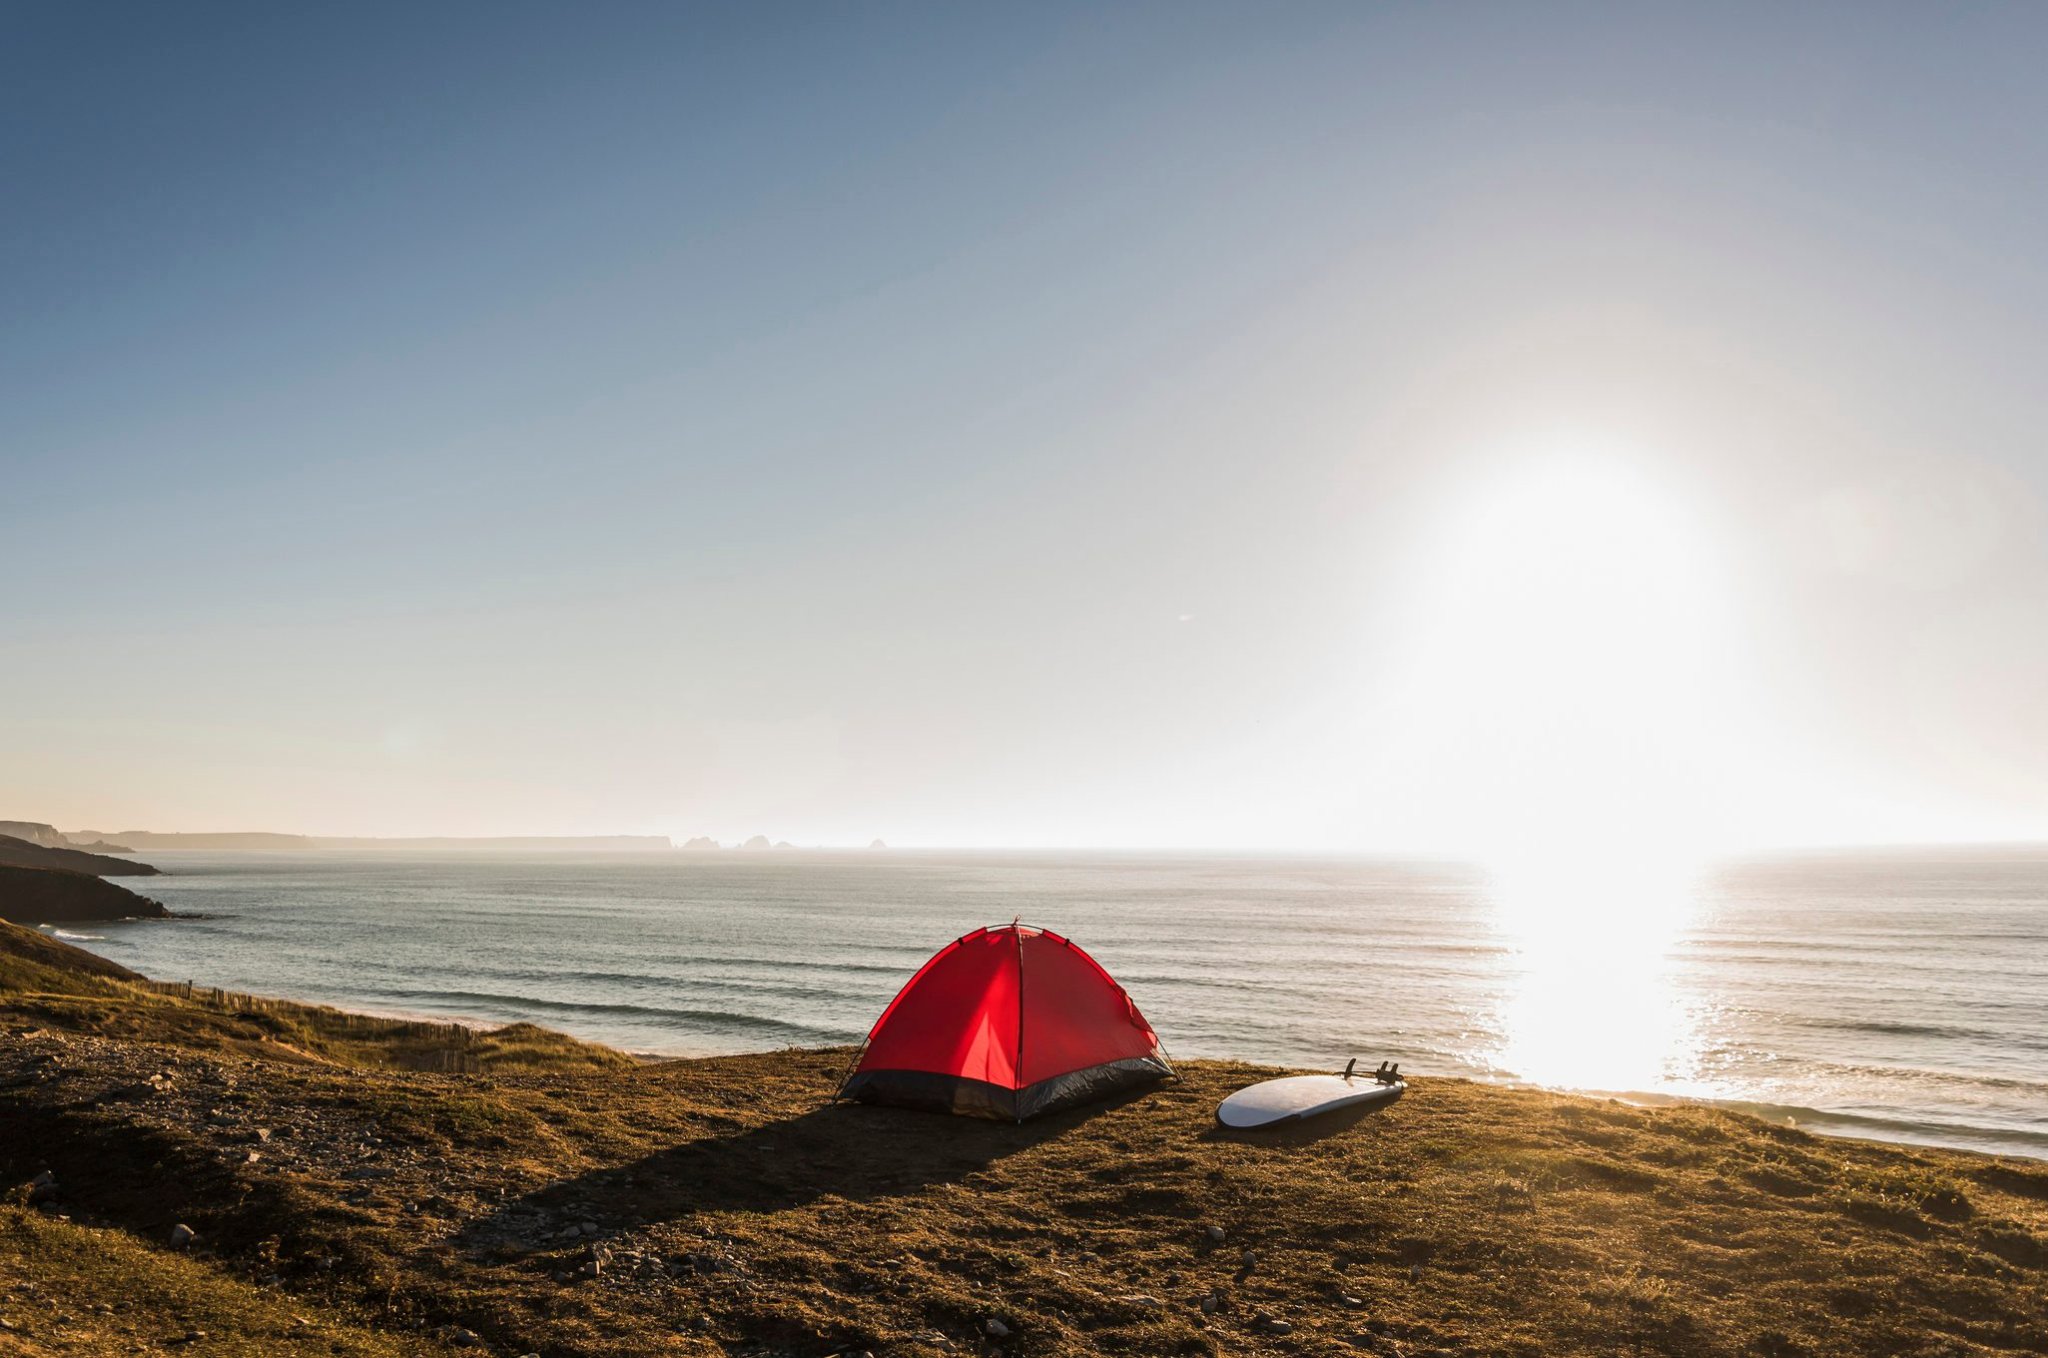 The Best 25 Spots Where You Can Camp on the Beach